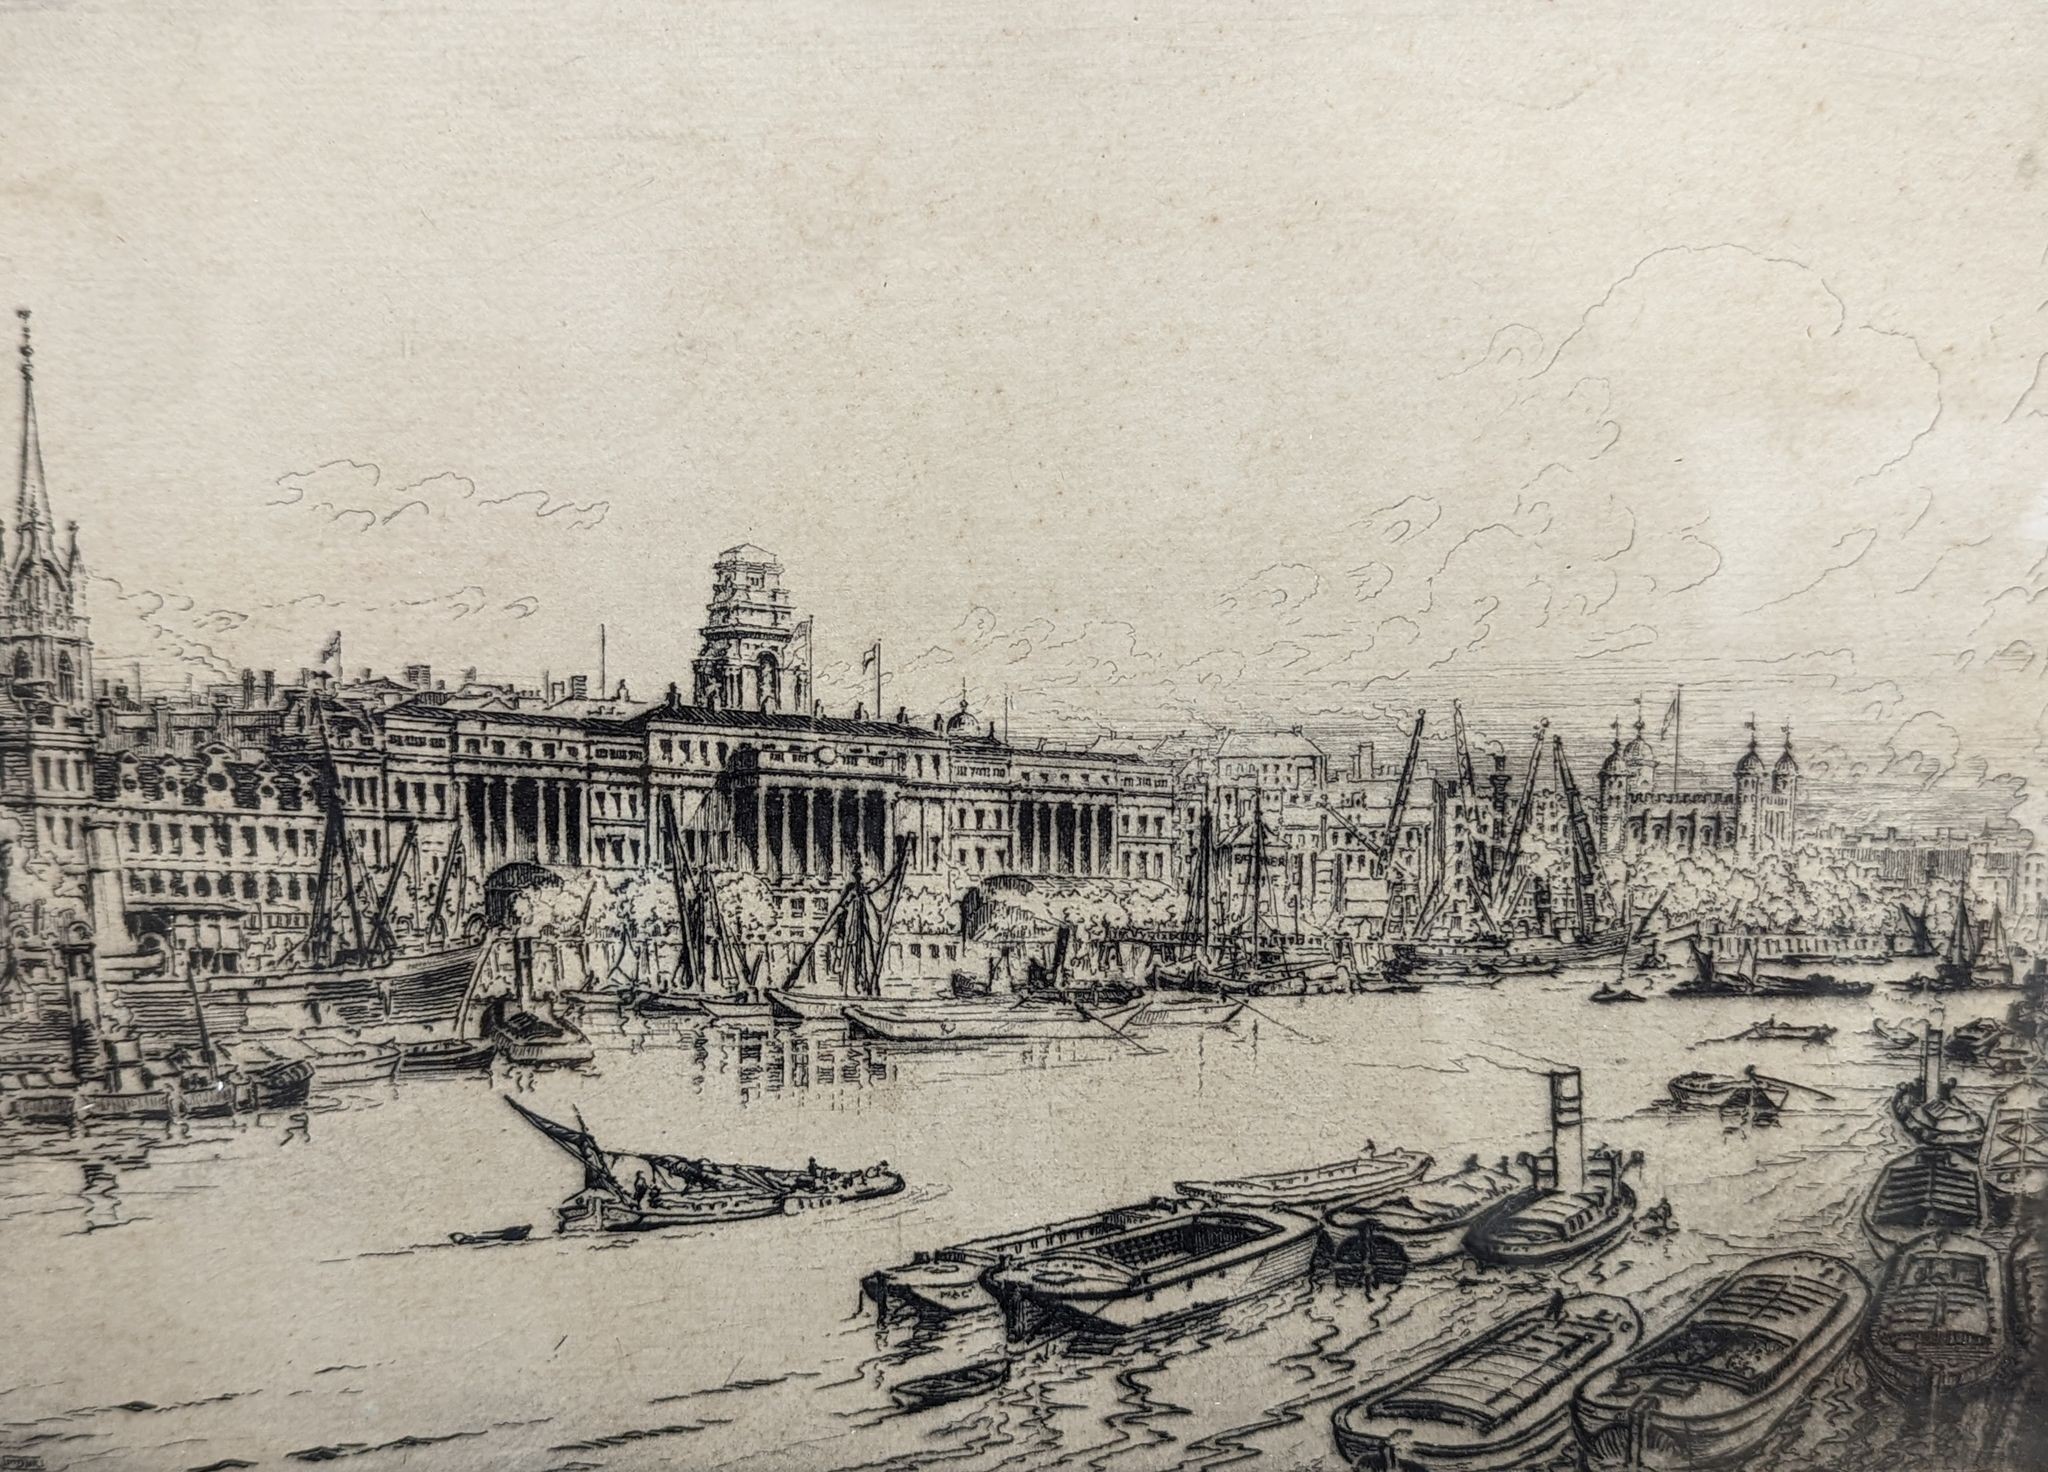 William Monk (1863-1937), etching, London River, inscribed in pencil, 17 x 25cm